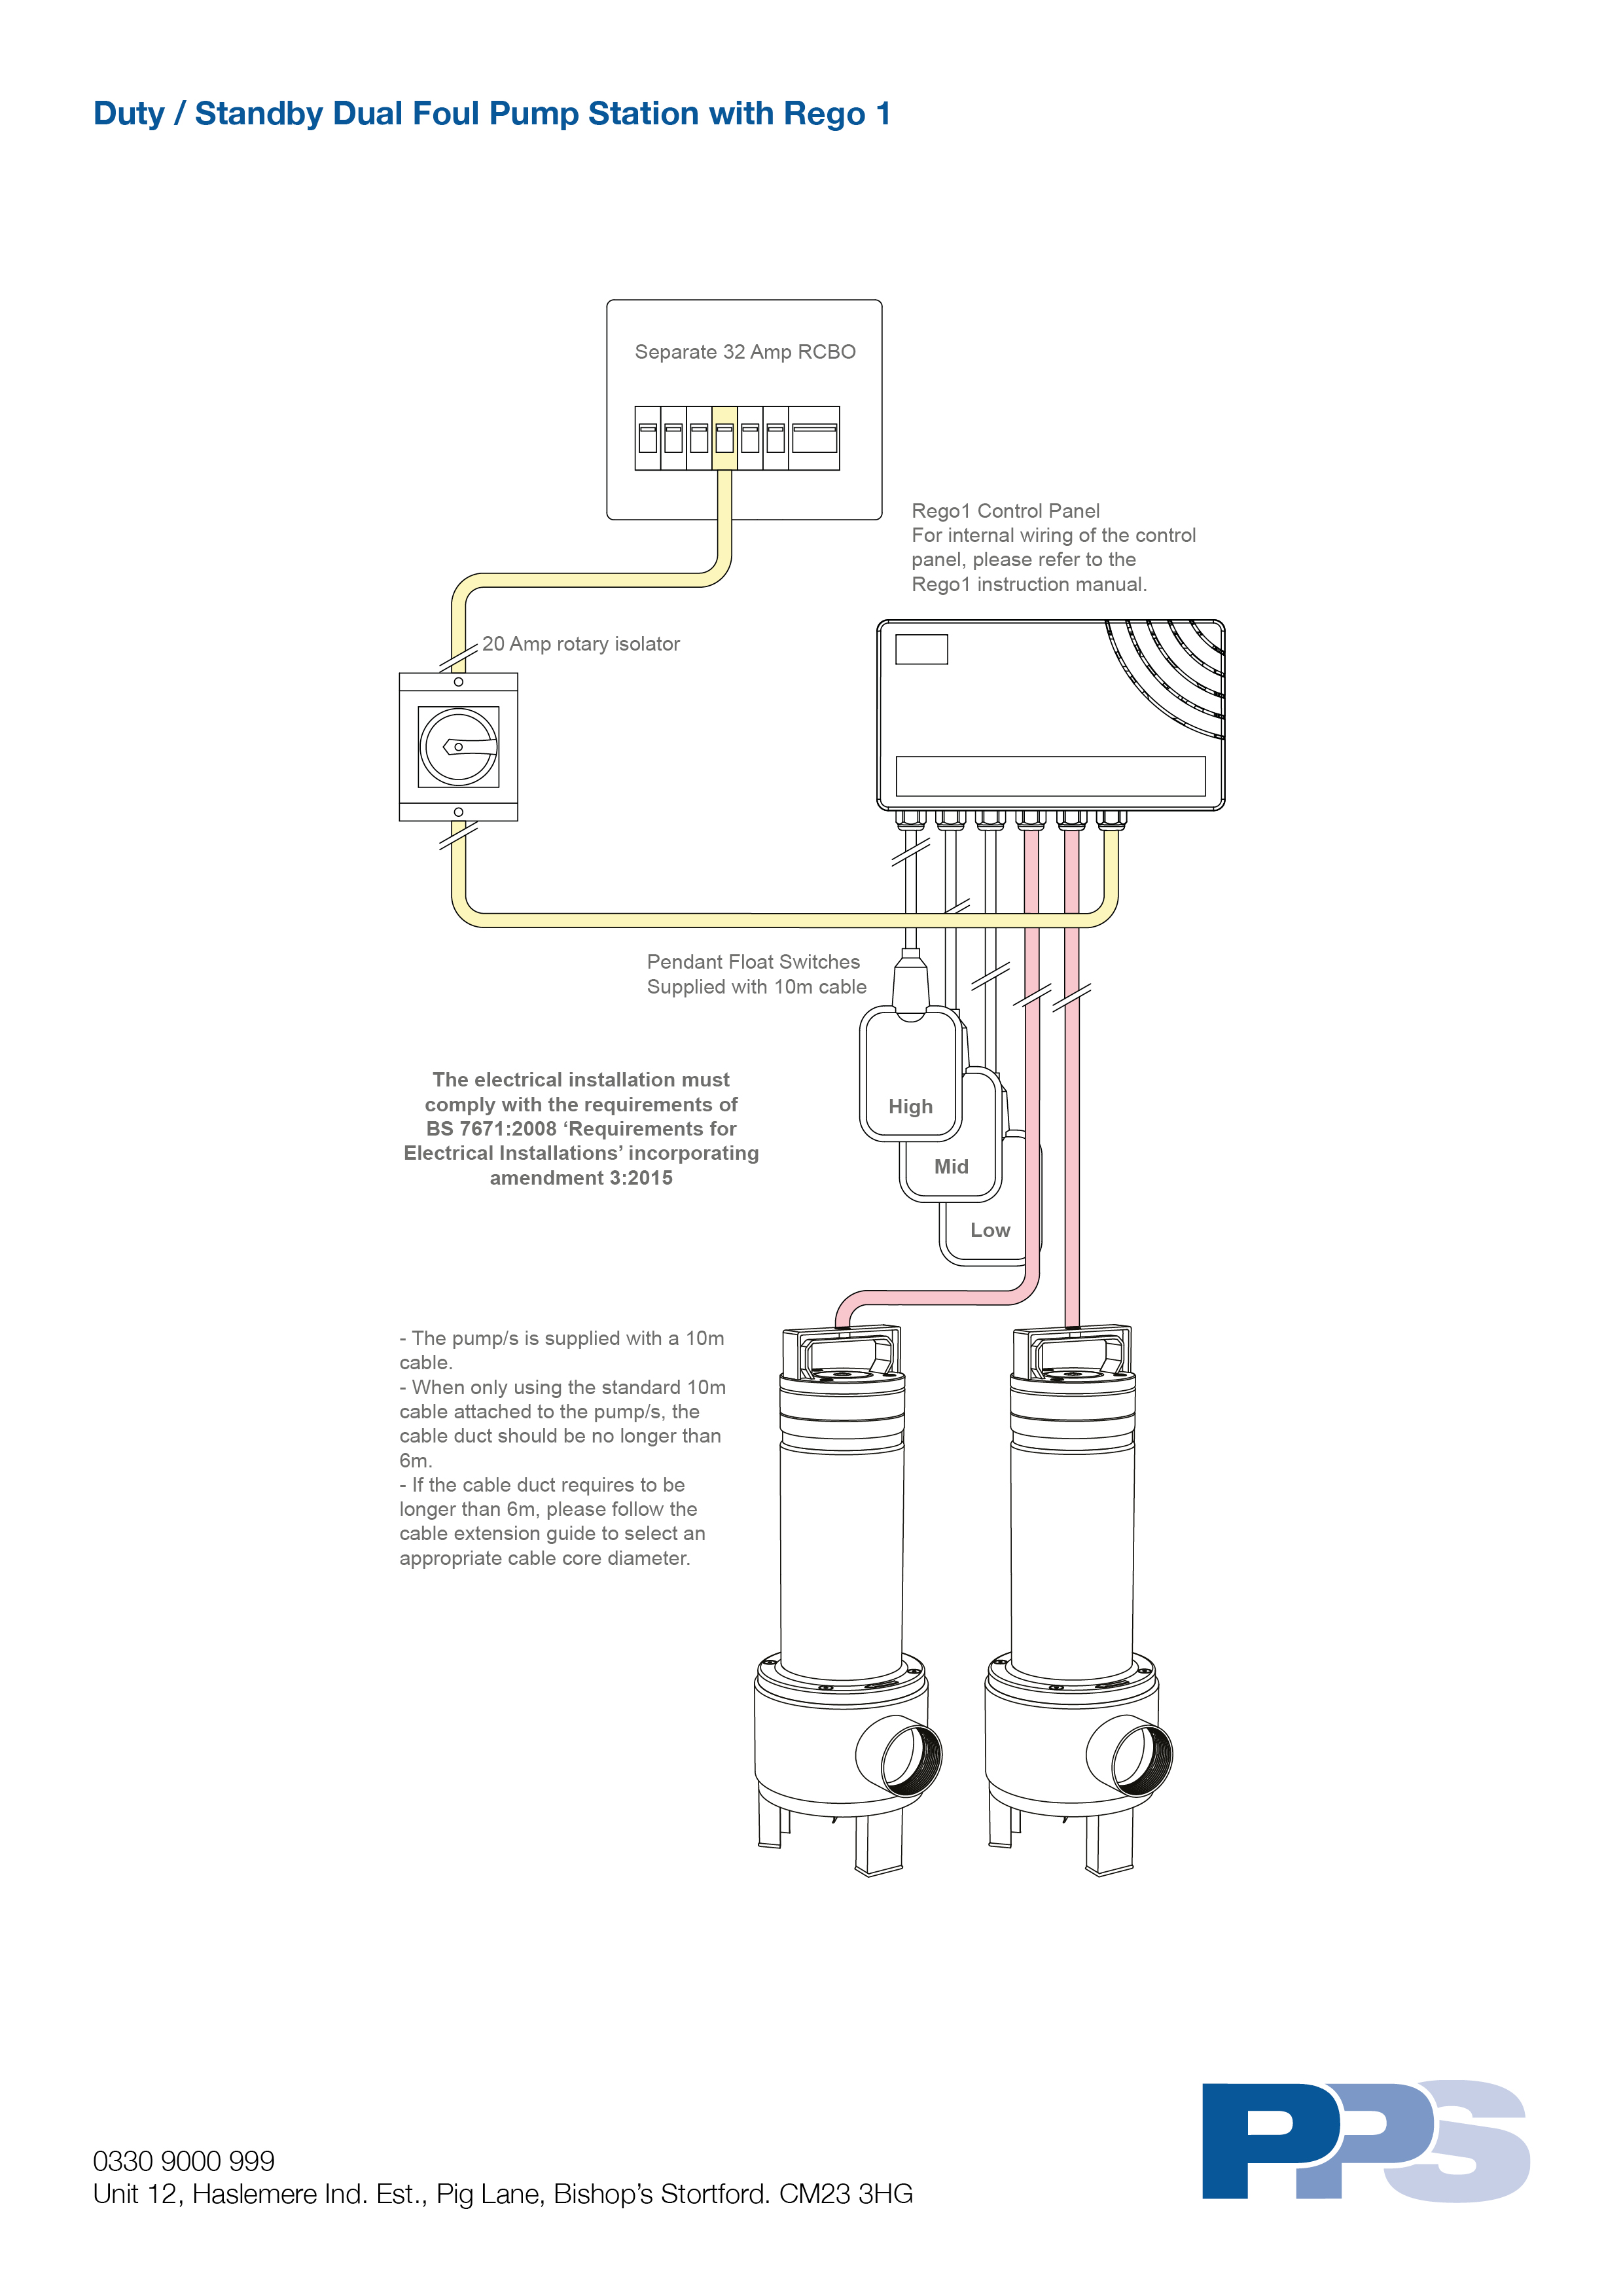 Duty_Standby_Dual_Foul_Water_Pump_Station_with_Rego1_Wiring_Diagram.jpg